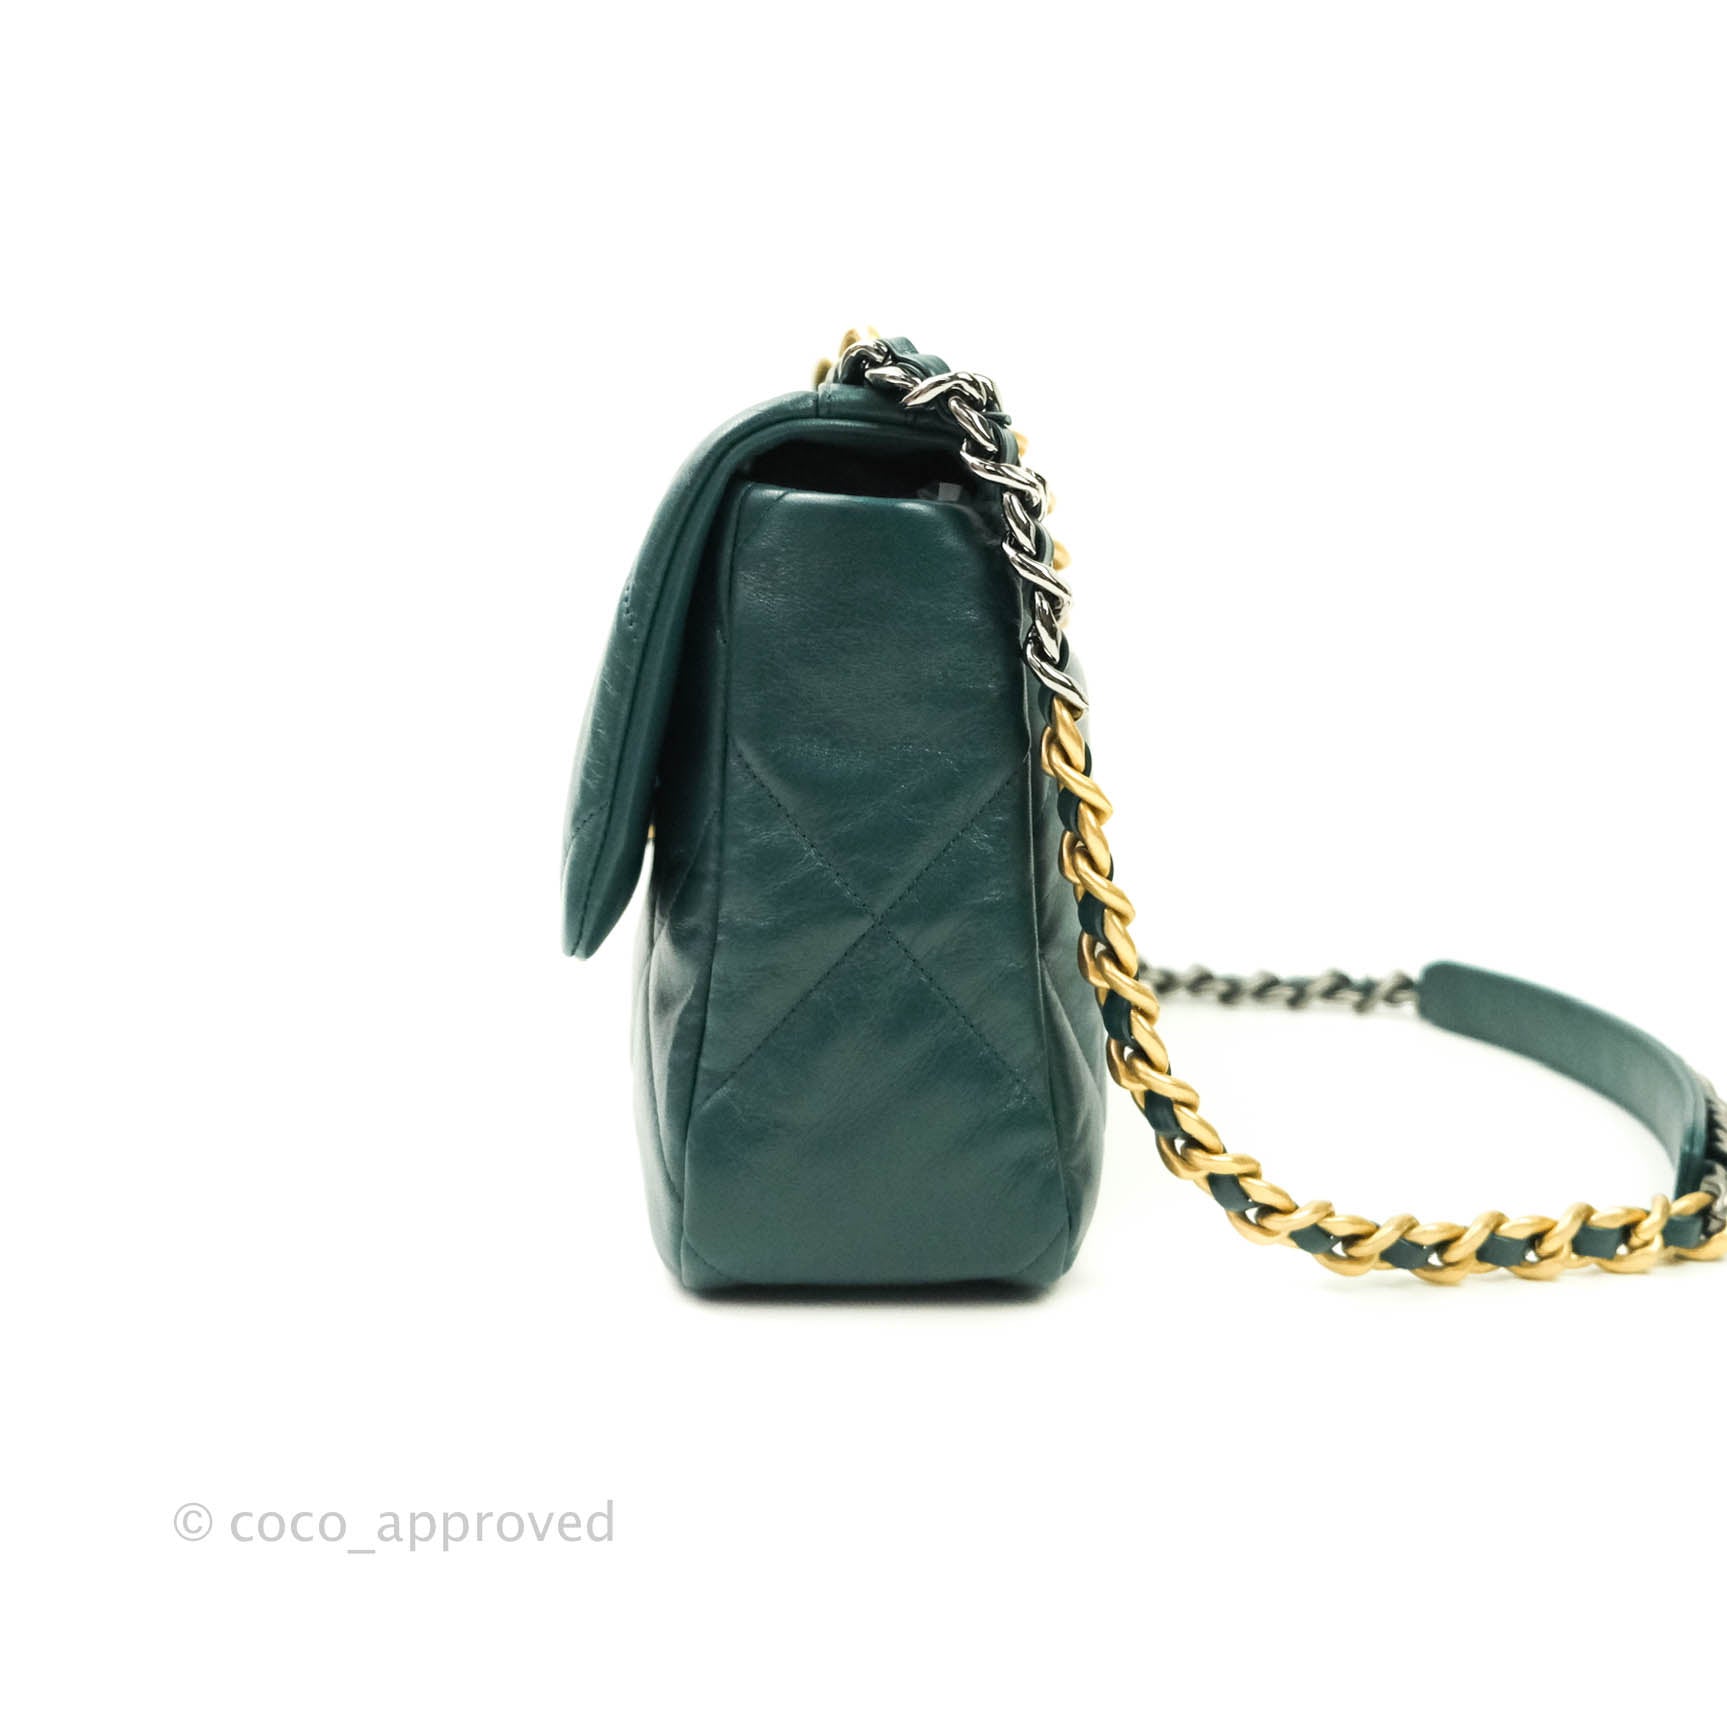 Chanel - Authenticated Chanel 19 Handbag - Leather Green Plain for Women, Never Worn